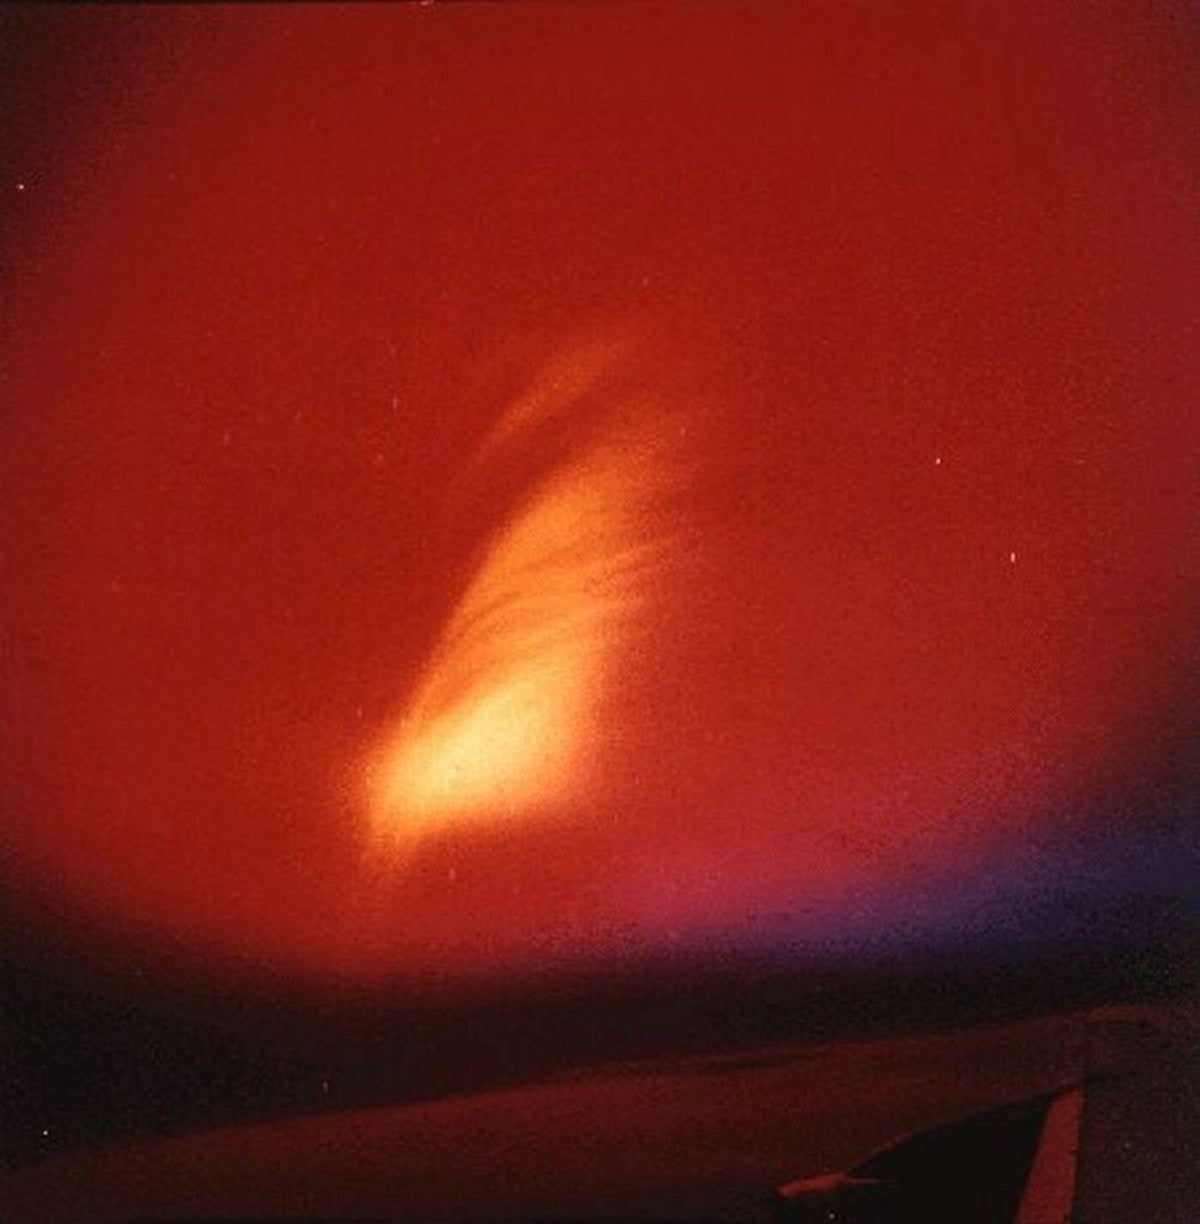 Sky appears red during nuclear test